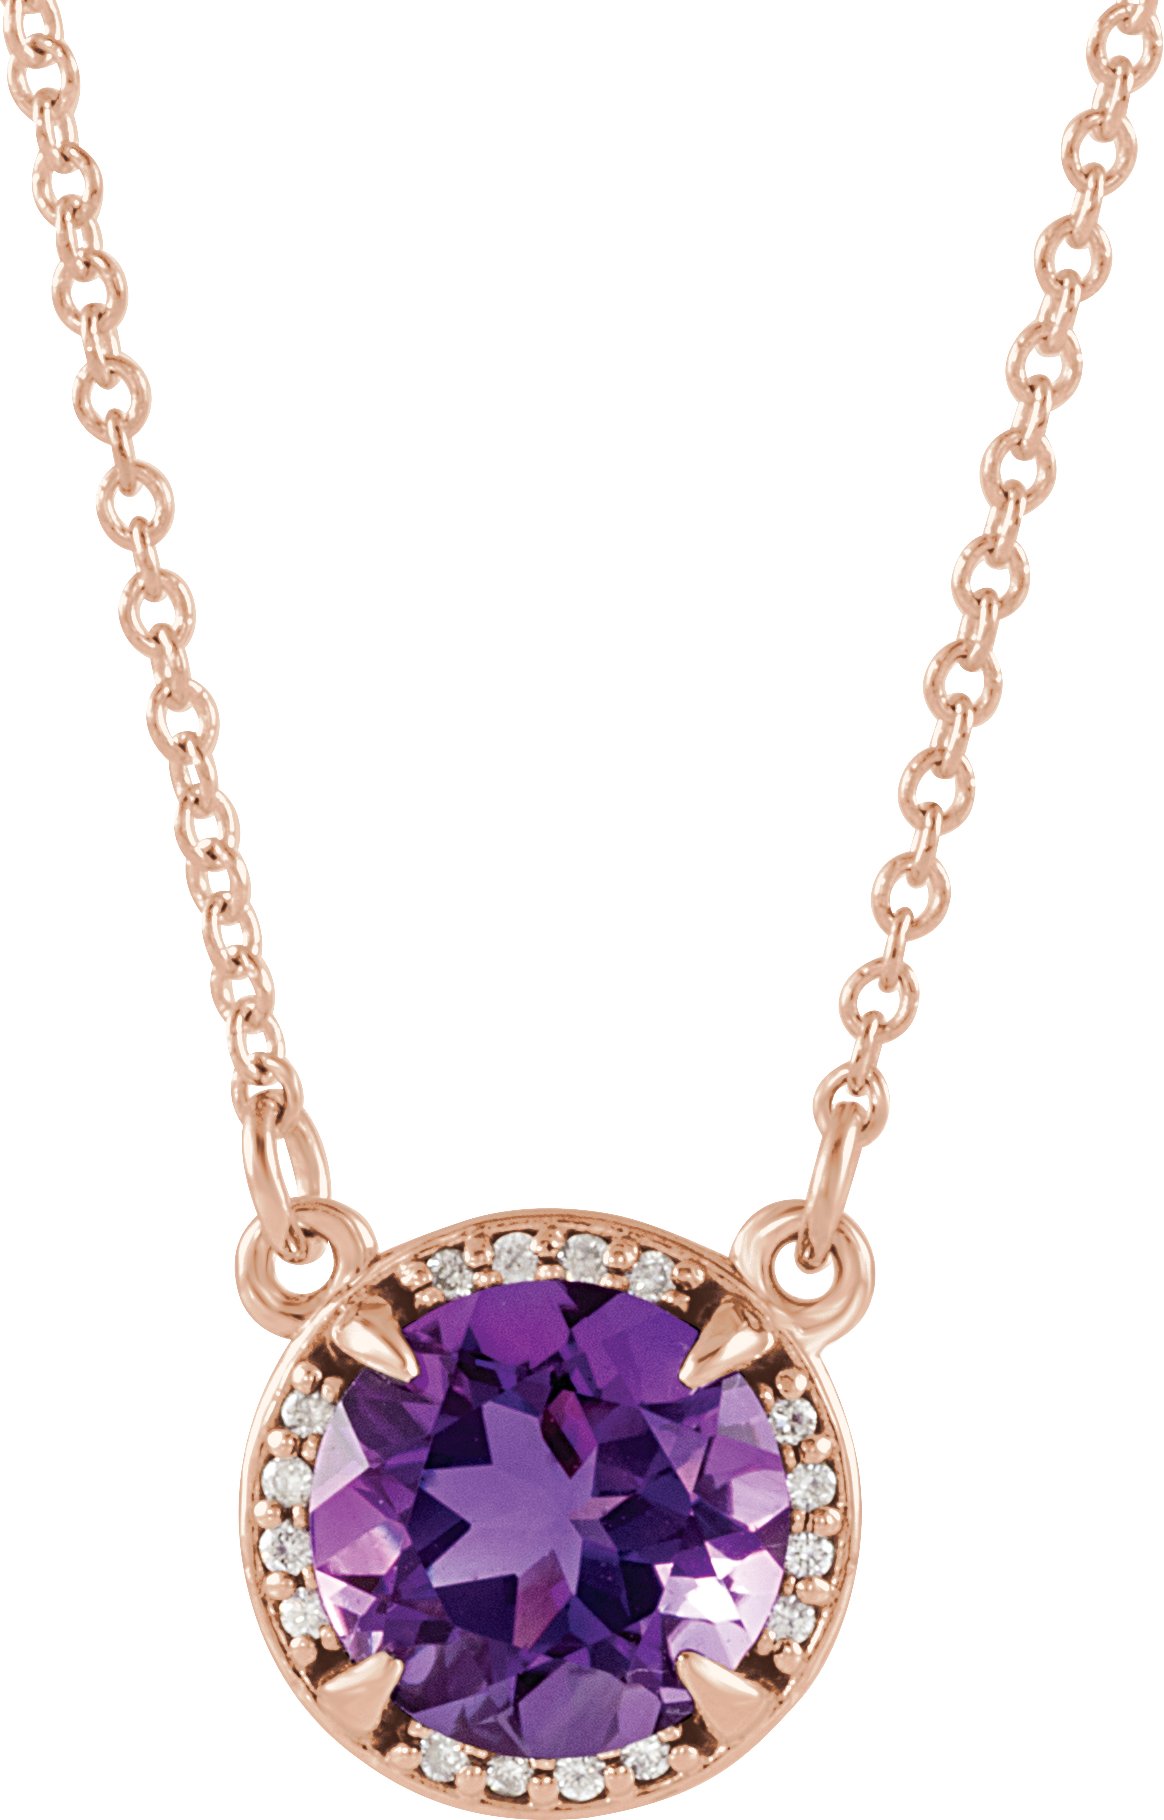 14K Rose 7 mm Round Amethyst and .04 CTW Diamond 16" Necklace